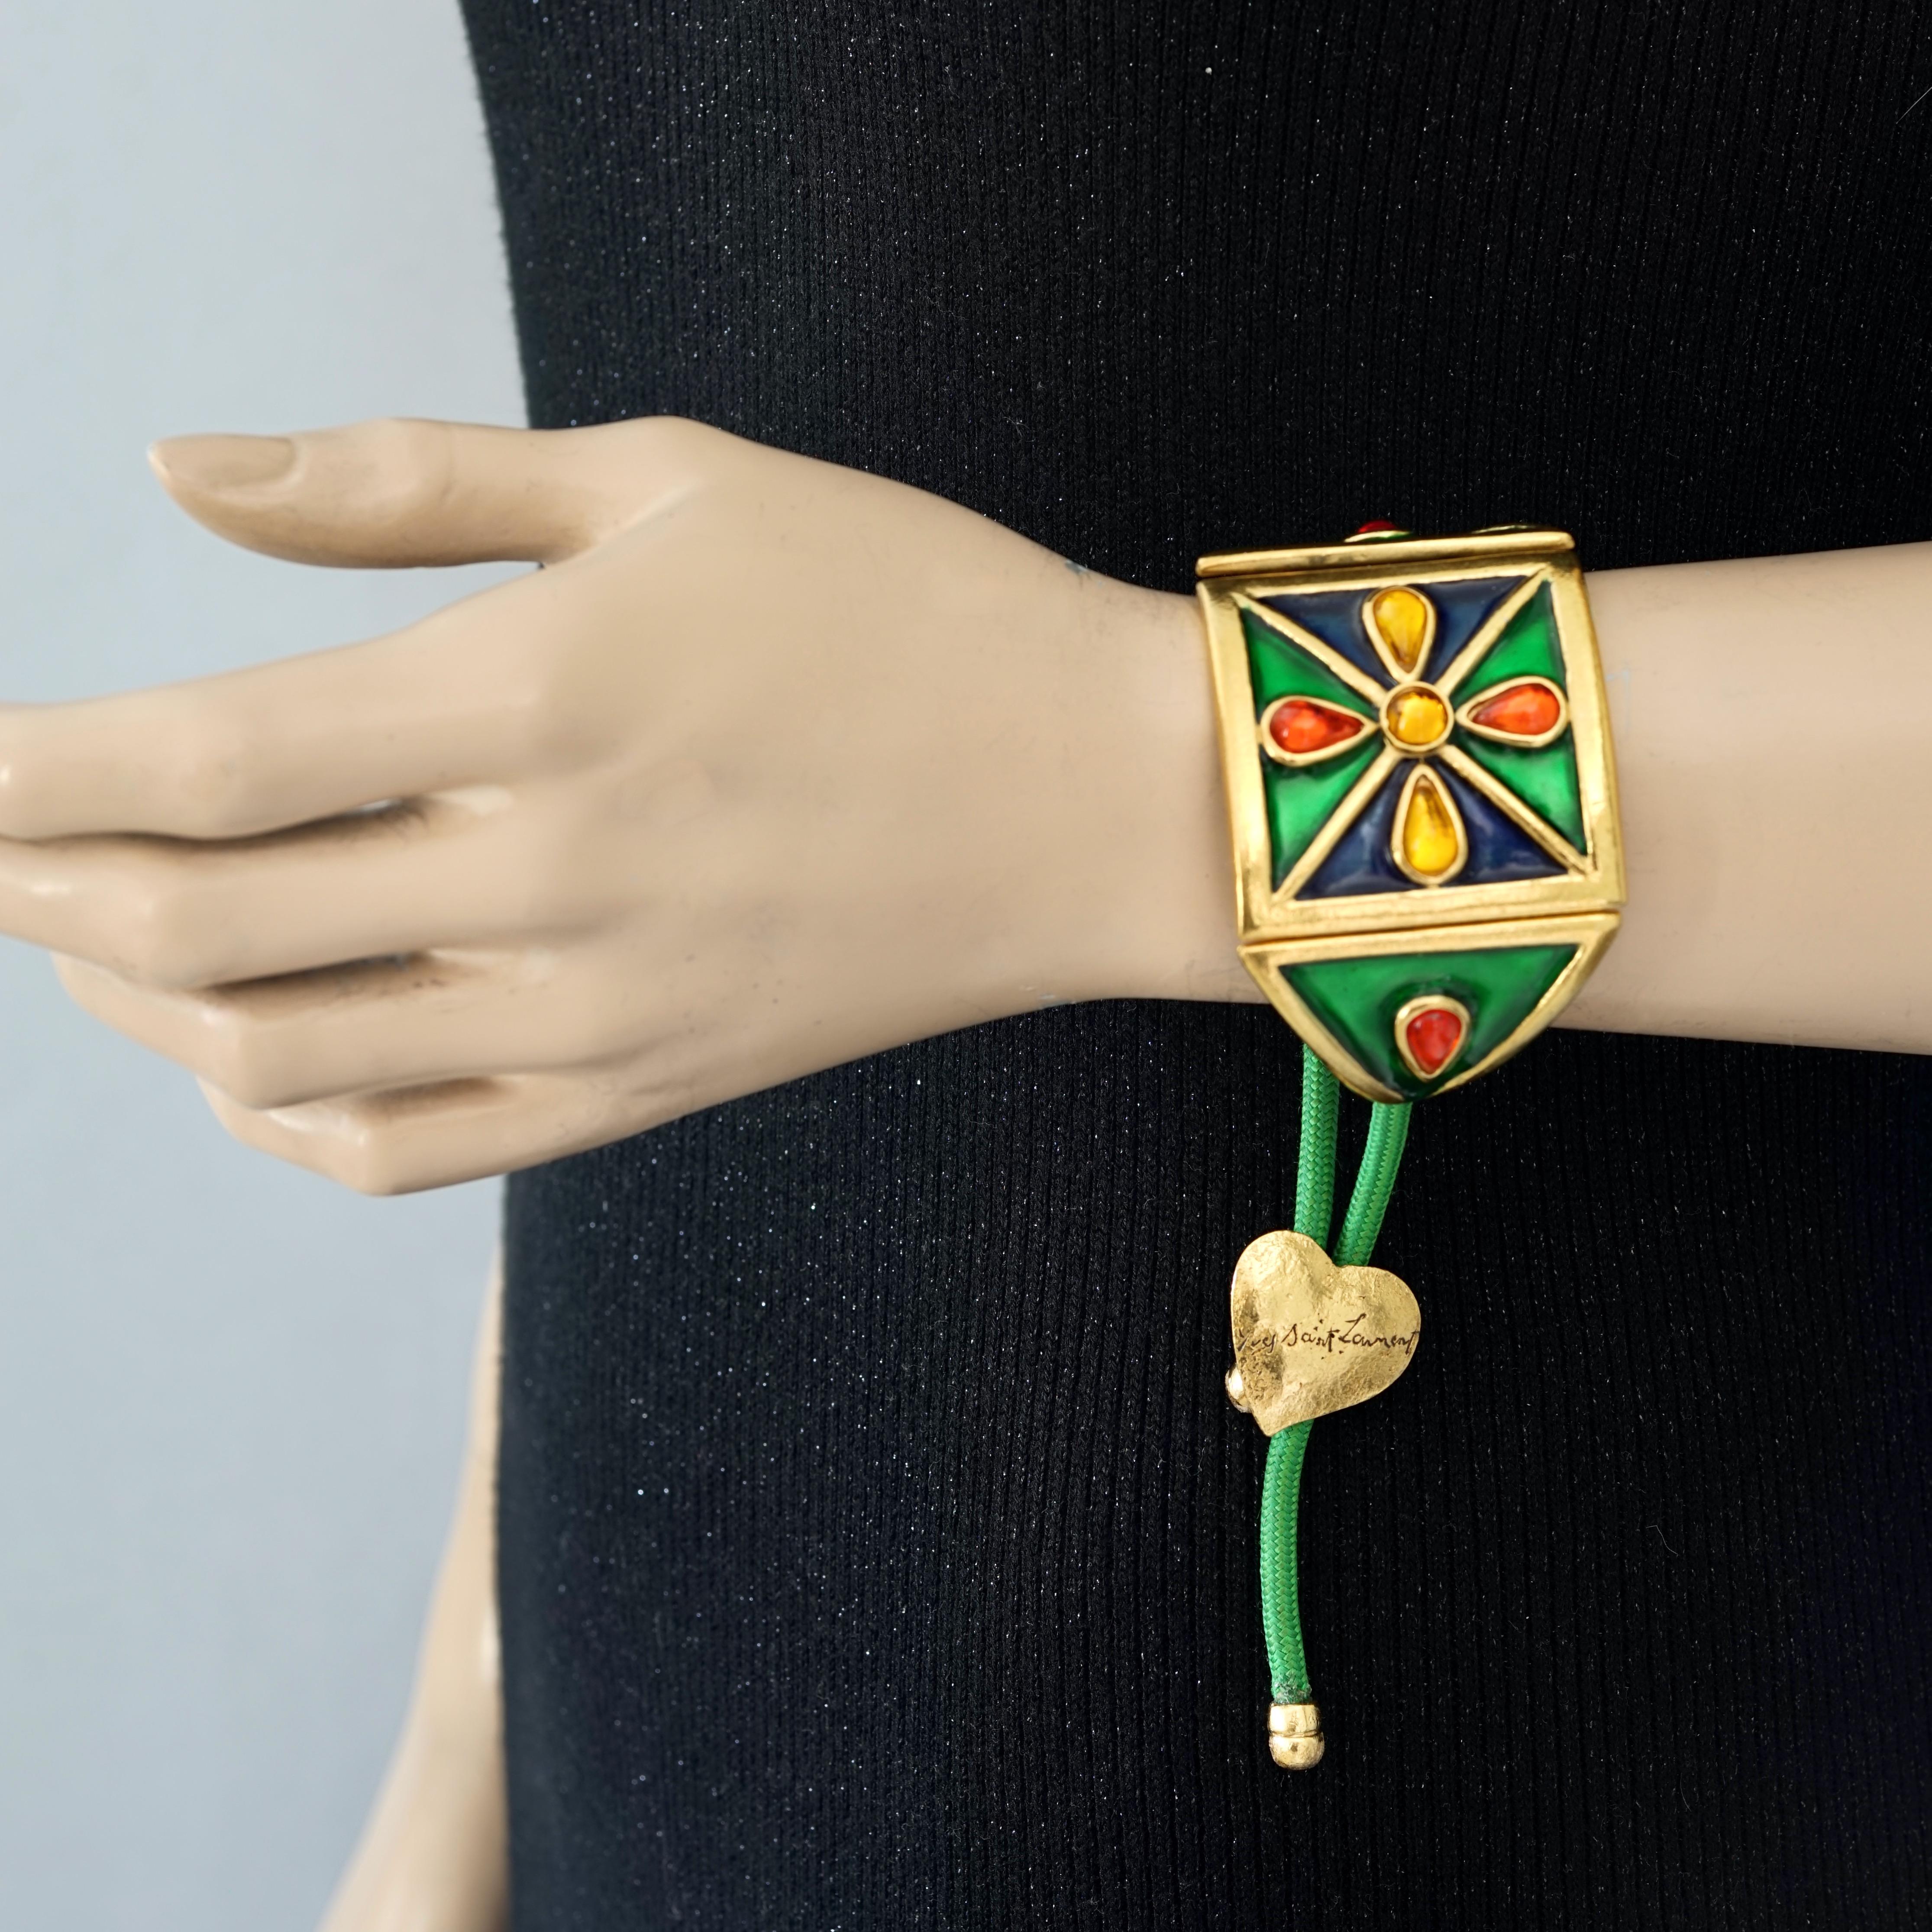 Vintage YVES SAINT LAURENT Ysl Flower Poured Glass Enamel Cord Cuff Bracelet

Measurements:
Height: 1.81 inches (4.6 cm)
Interior Width Metal Part: 4.33 inches (11 cm)
Length of Cord: 3.54 inches (9 cm) each sides

Features:
- 100% Authentic YVES